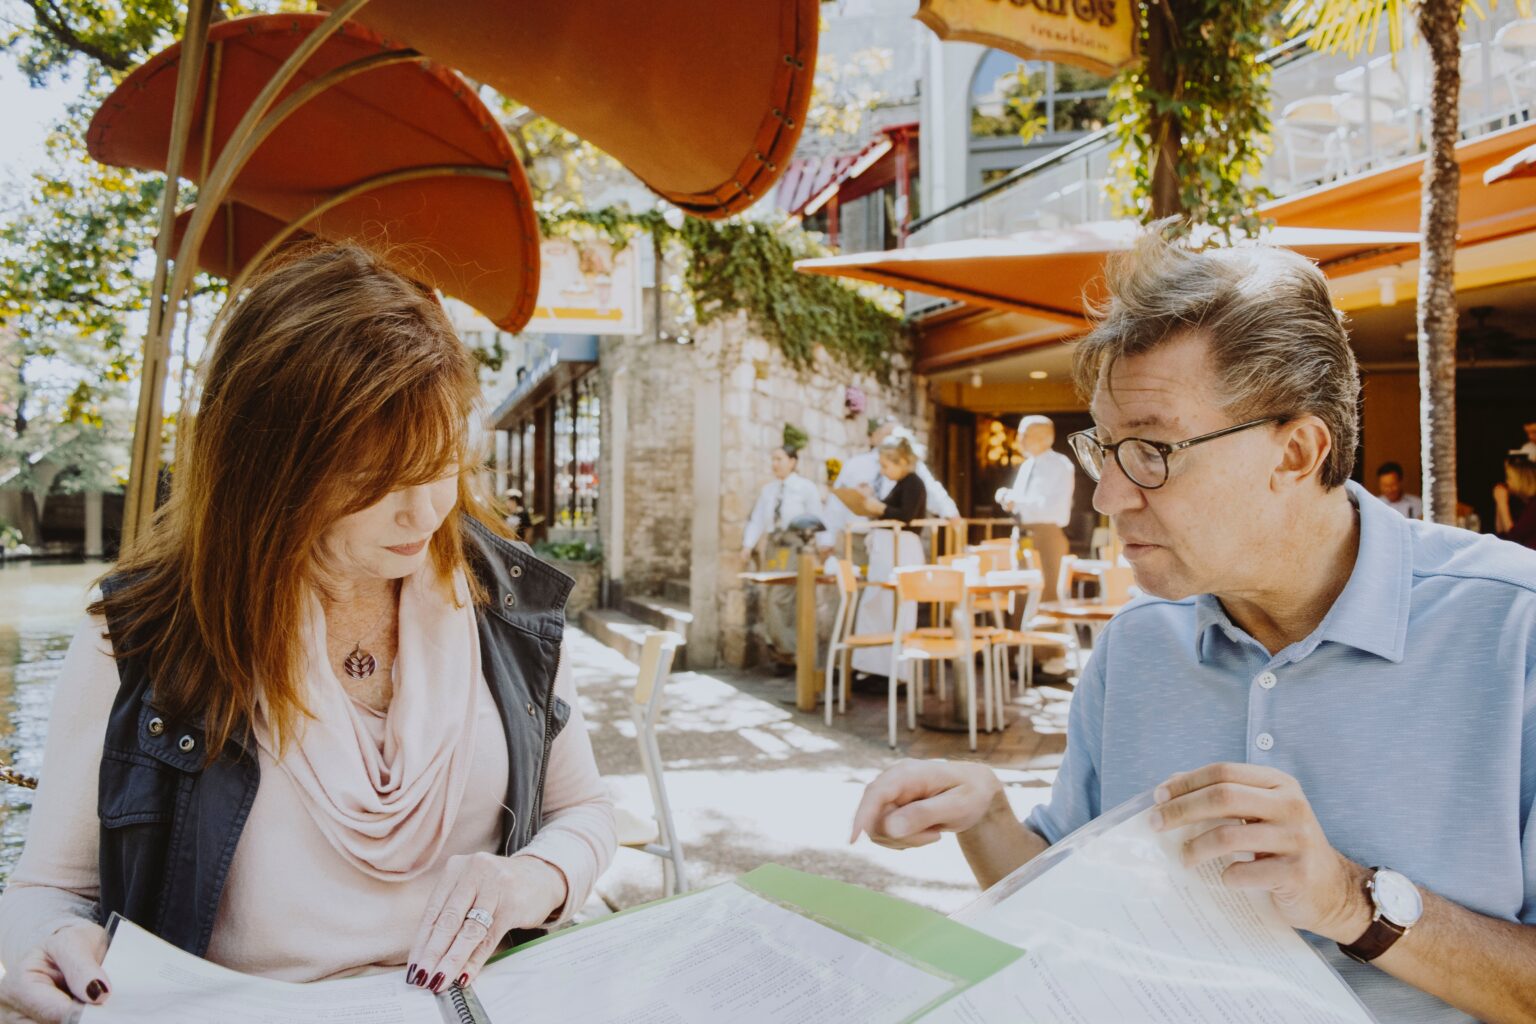 Middle-Aged Couple Looking at Menus at a Restaurant